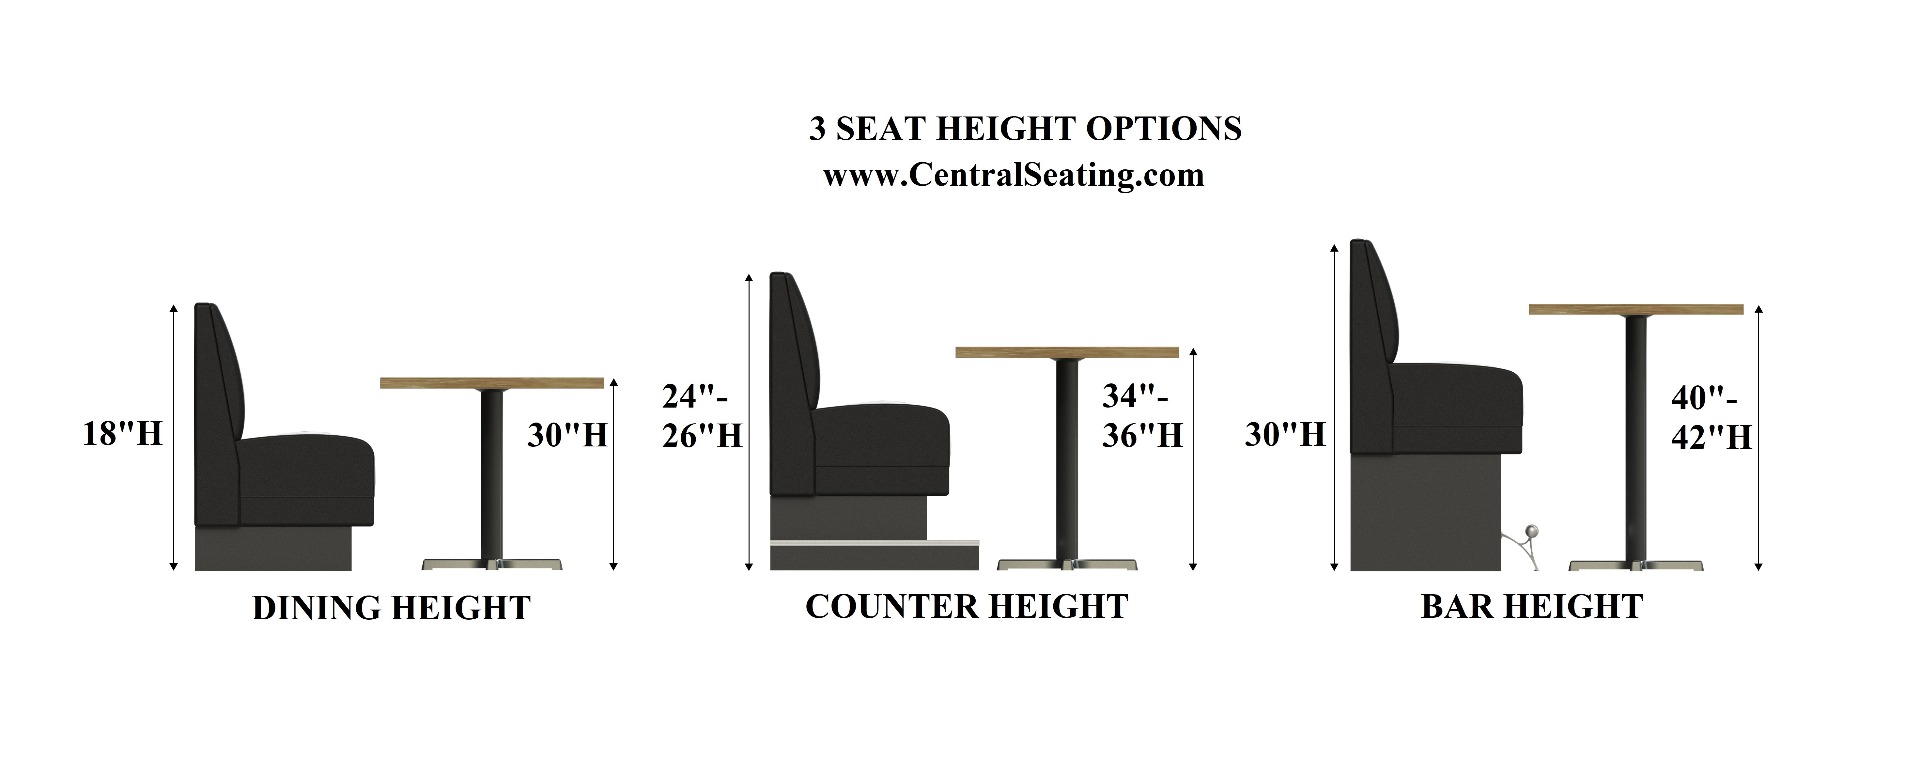 Restaurant Booth Seat Height Options Dimensions Measurements Specs